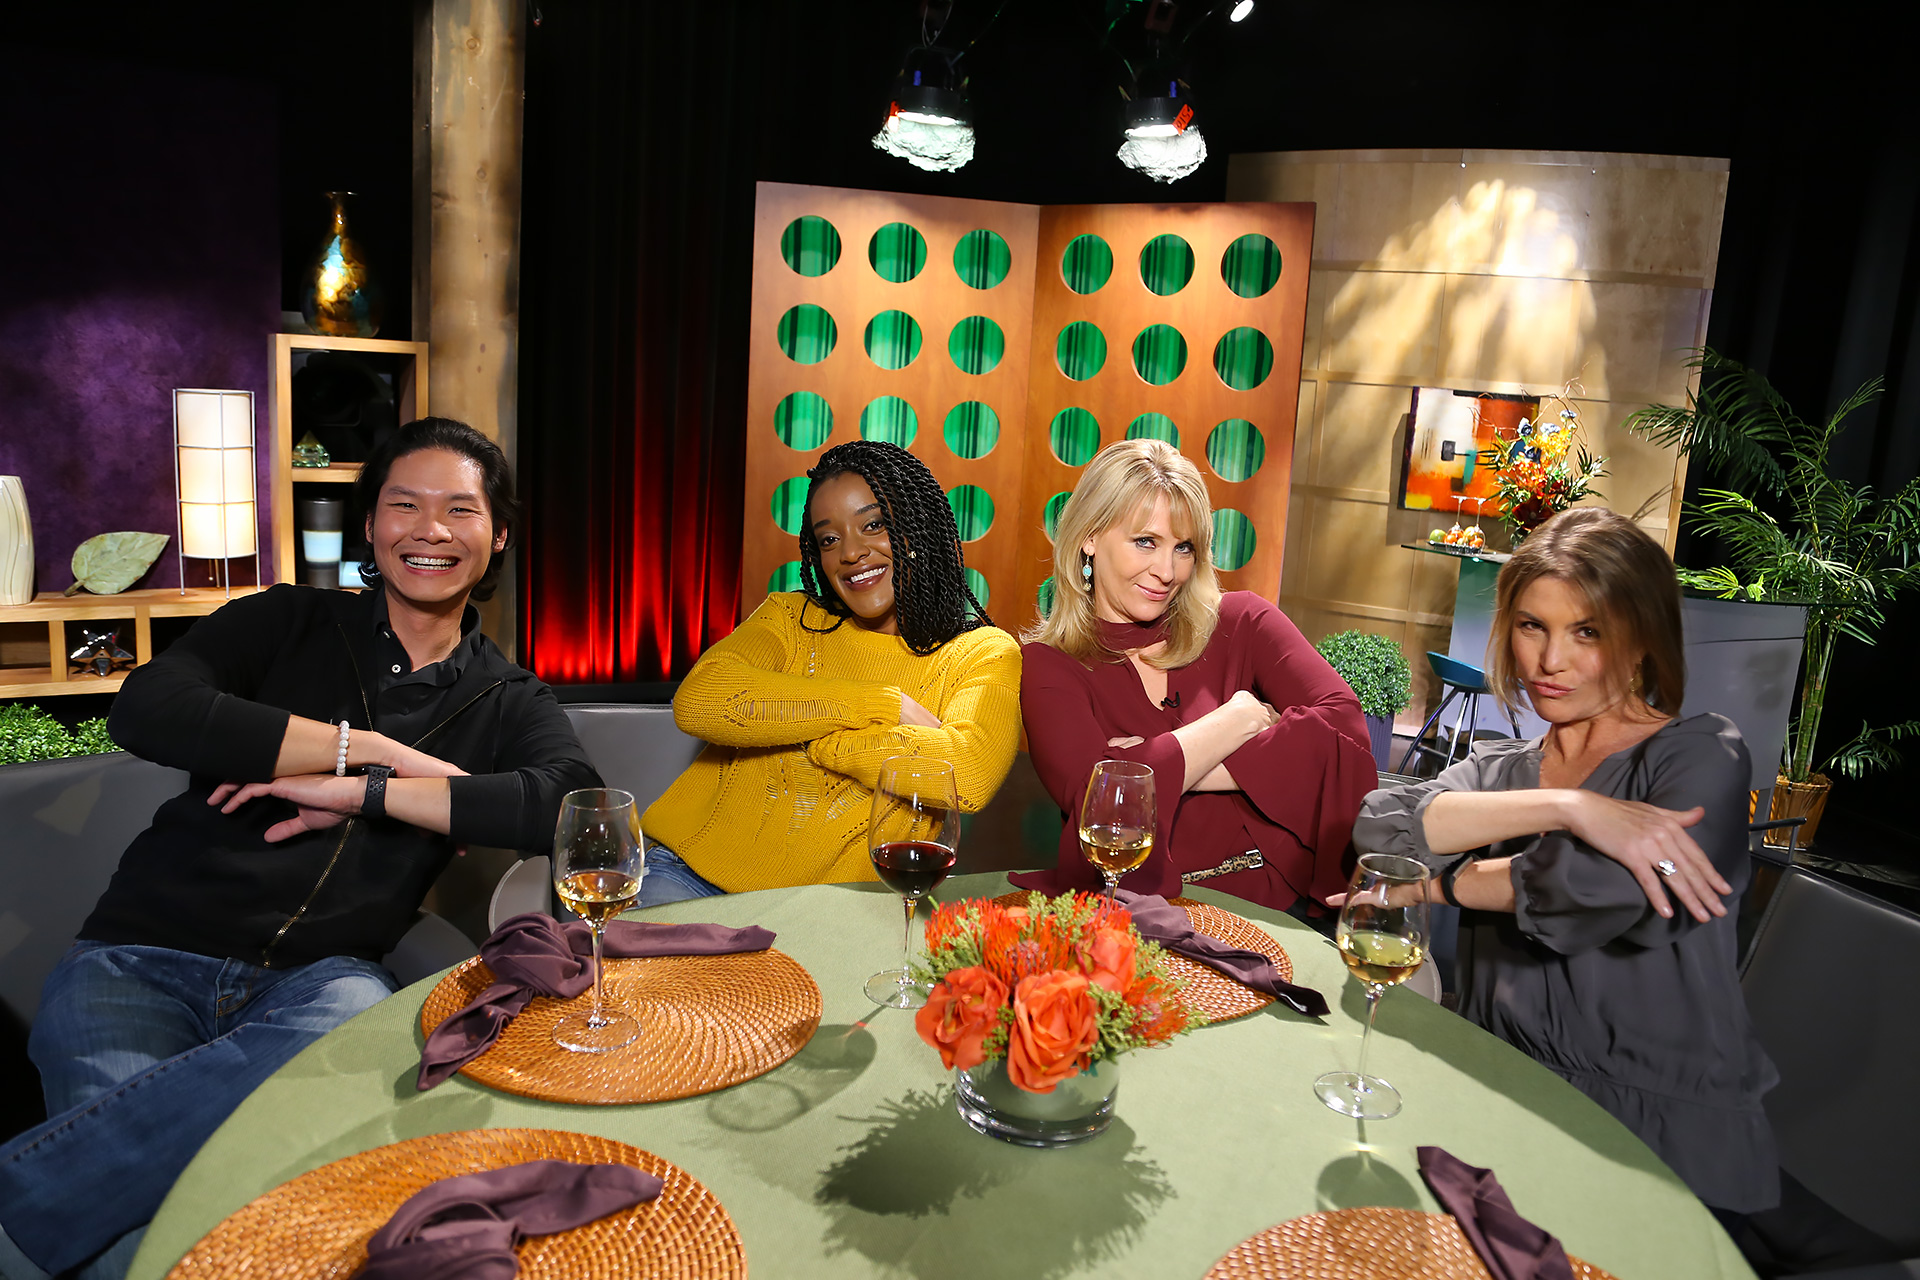 Host Leslie Sbrocco and guests having fun on the set of season 13 episode 8.